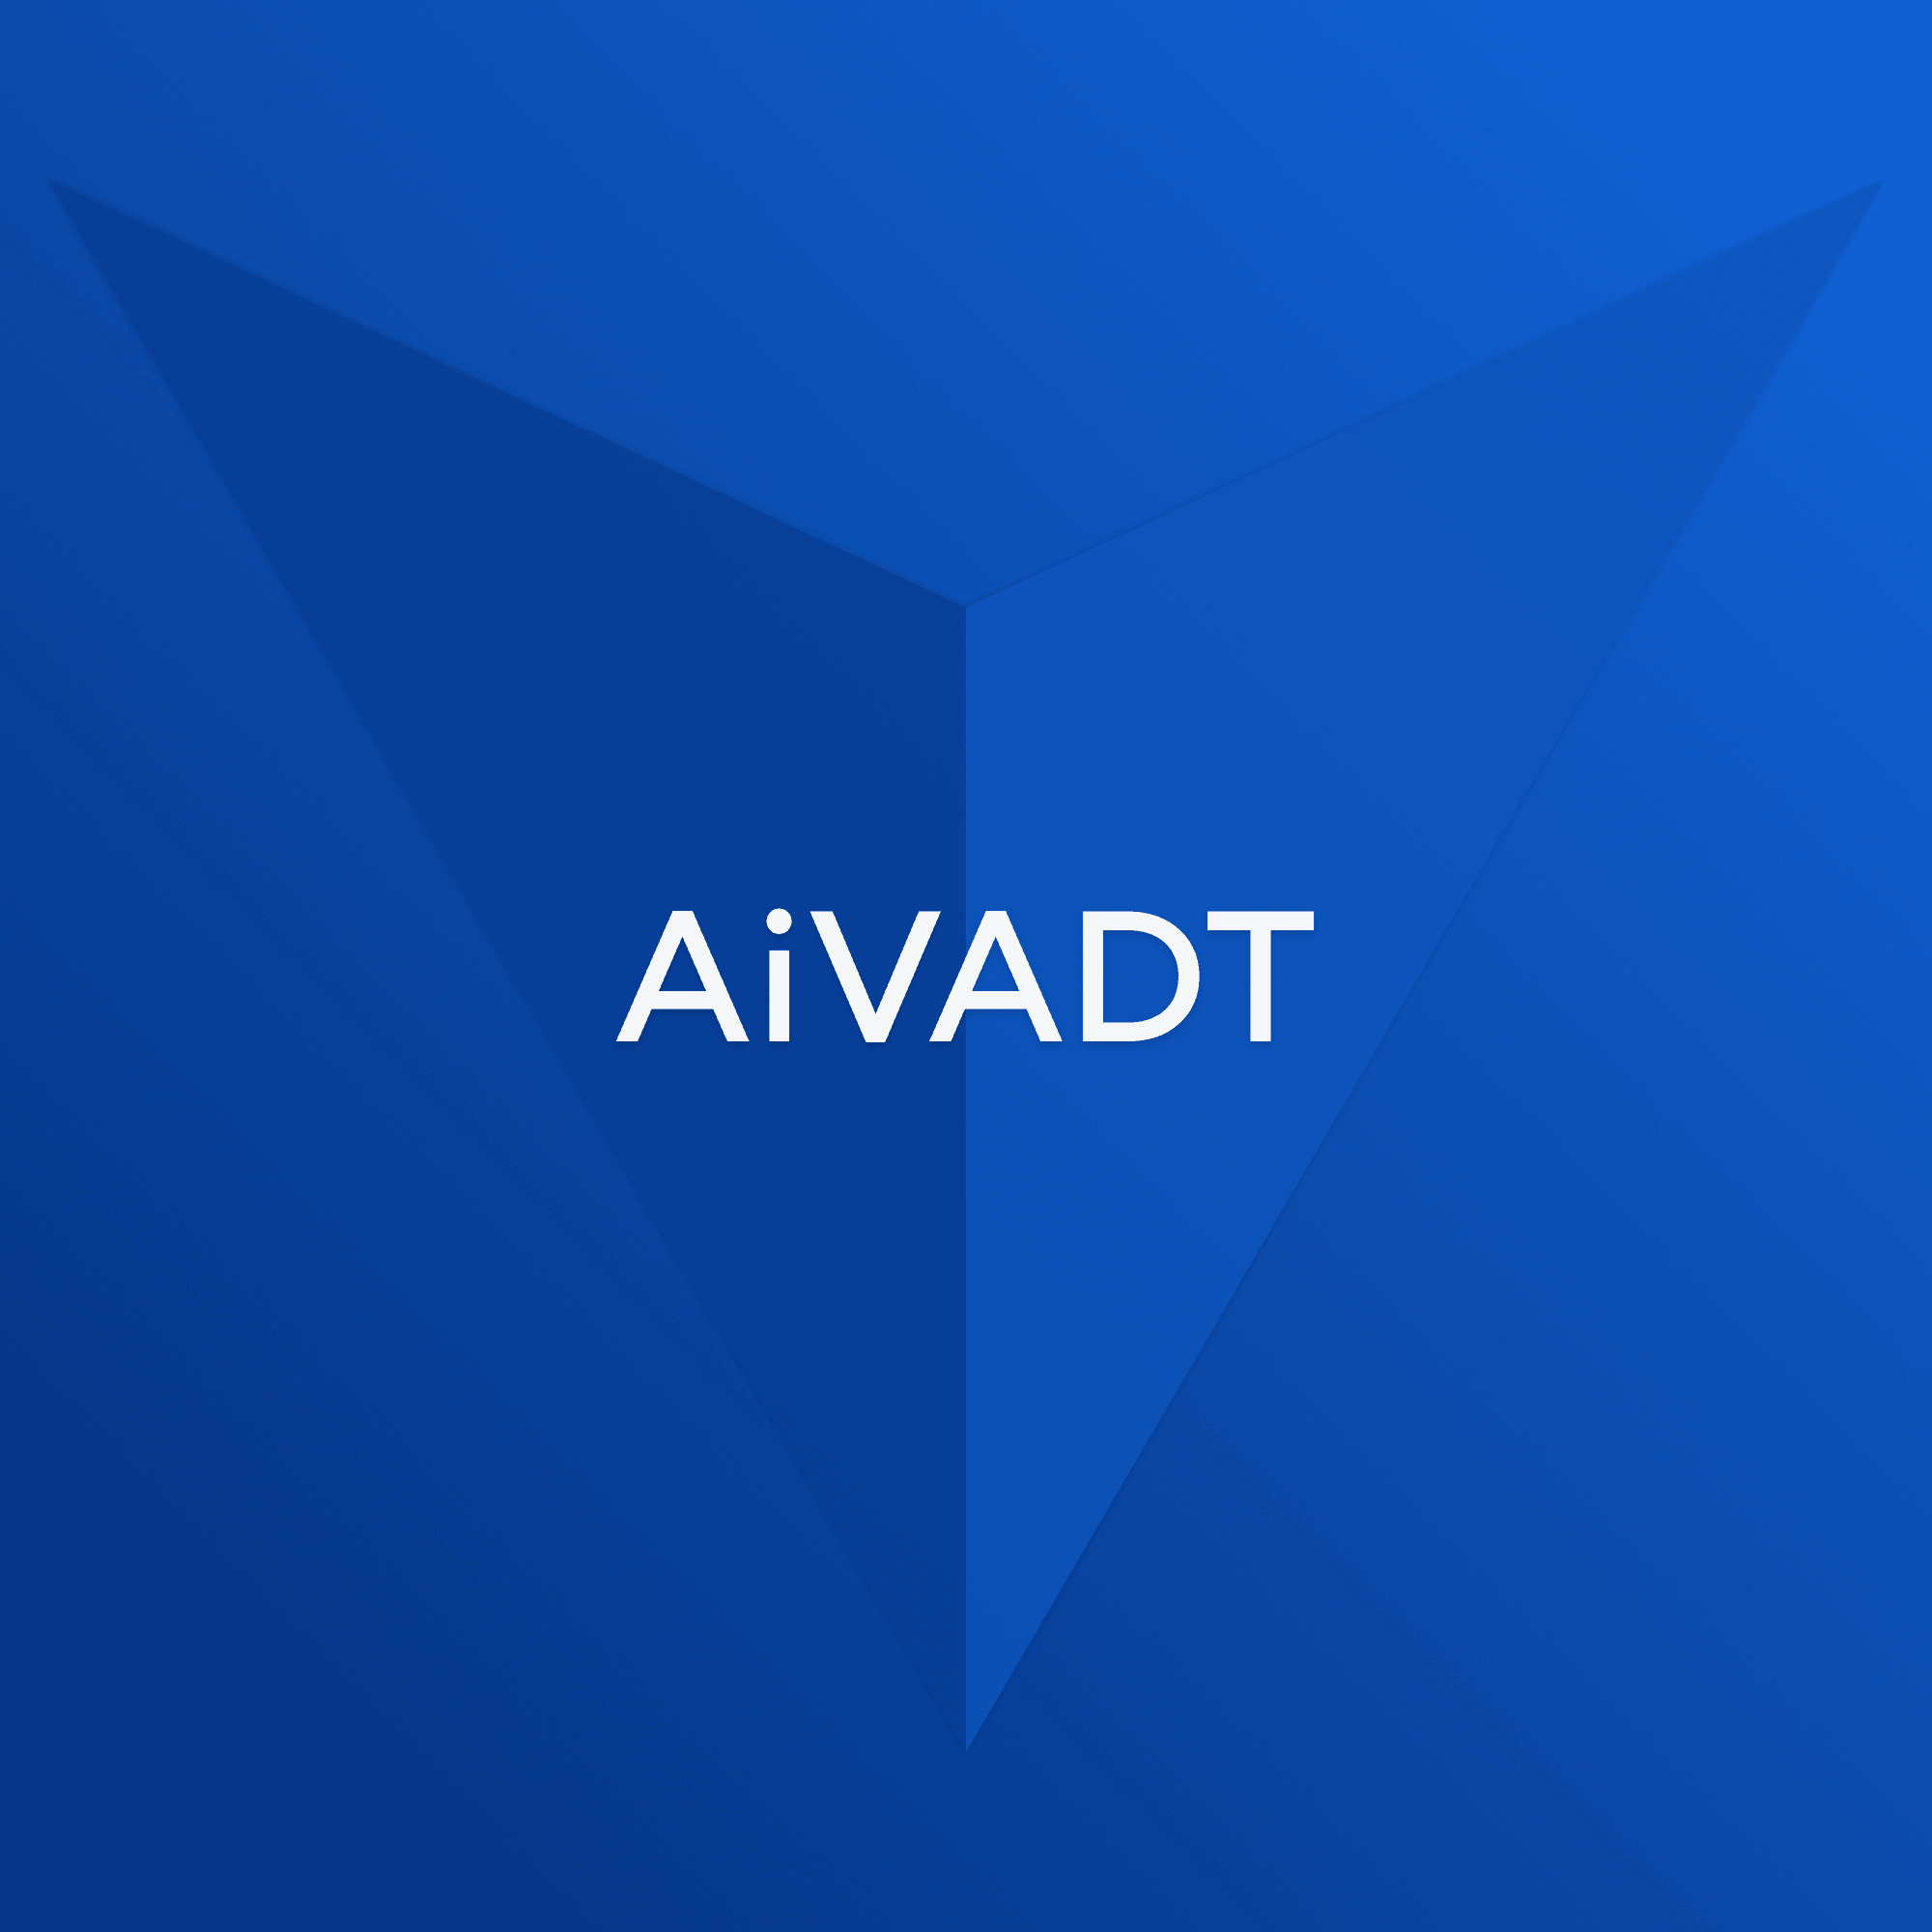 AiVADT